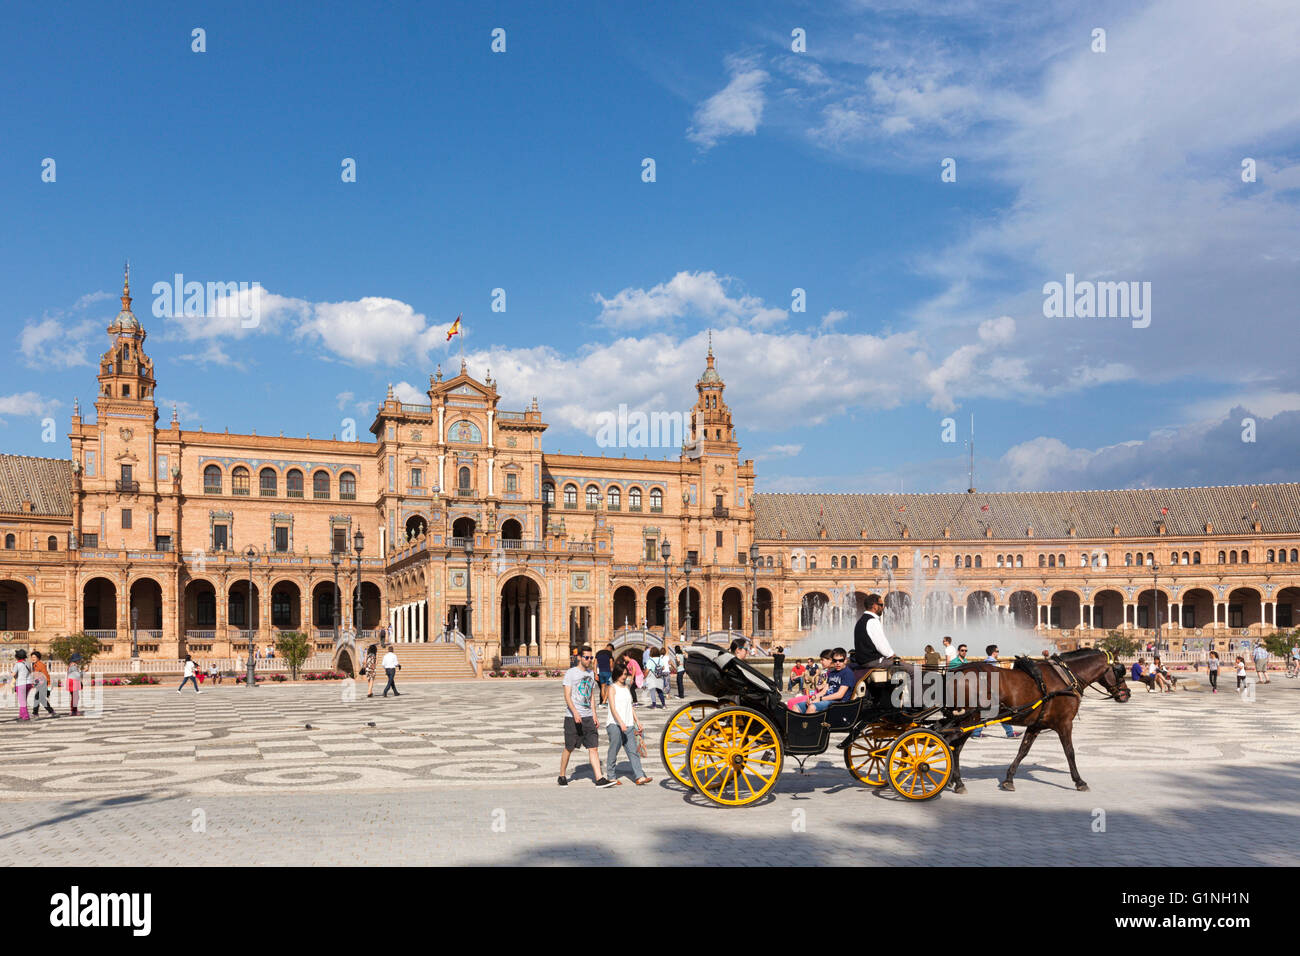 UNESCO world heritage site Plaza de Espana, Seville, Spain. A horse drawn carriage and tourists in the foreground. Stock Photo